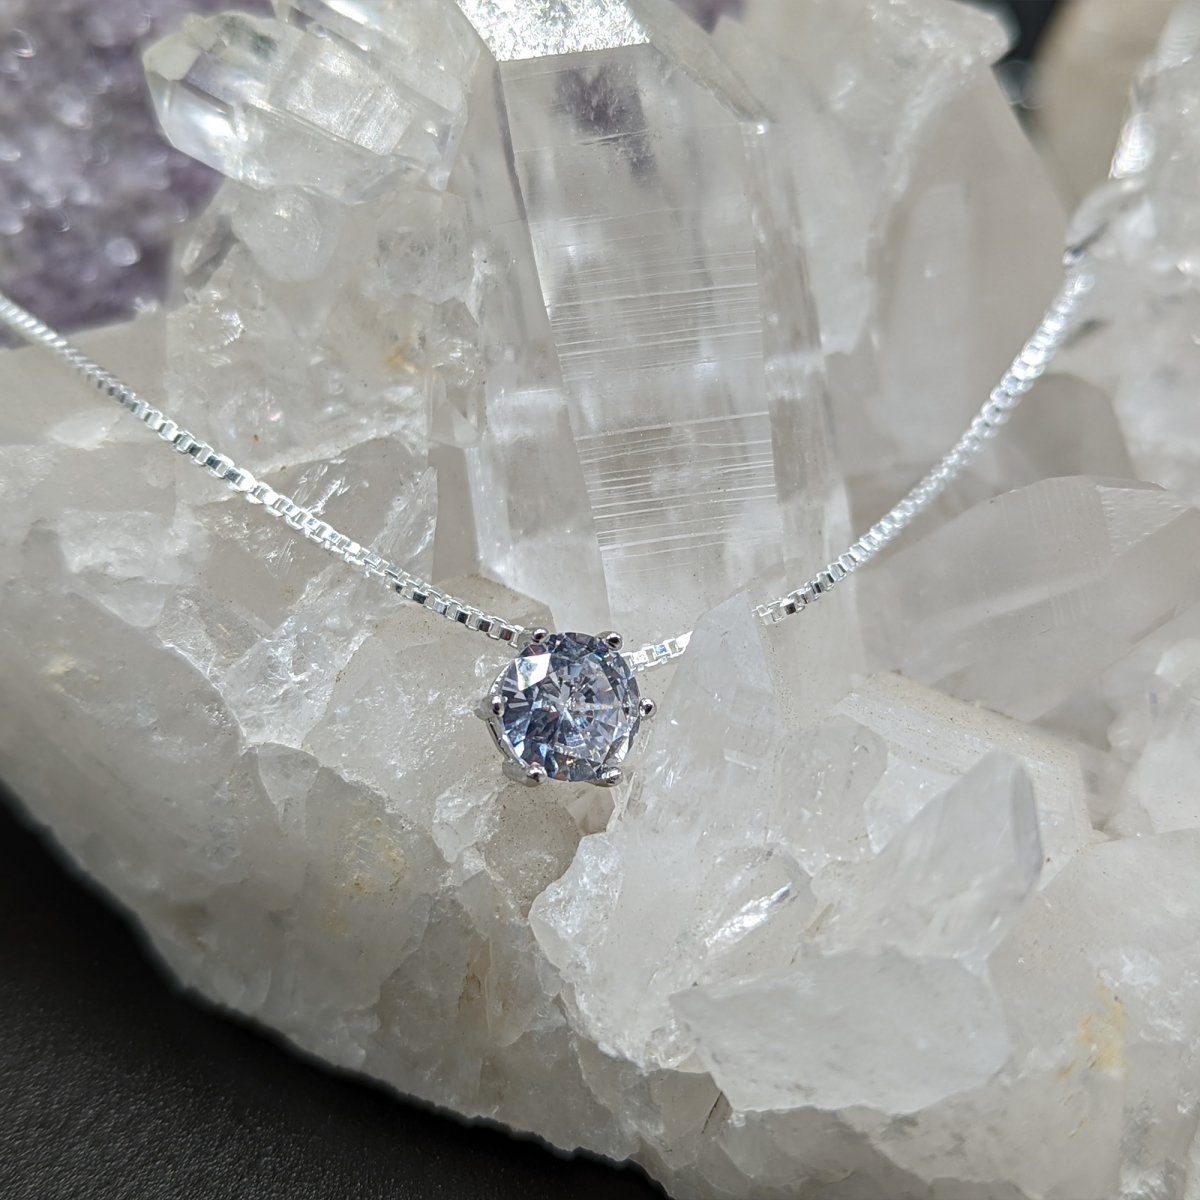 Gift for Bonus Mom - Dainty CZ Sterling Silver Necklace - Meaningful Cards